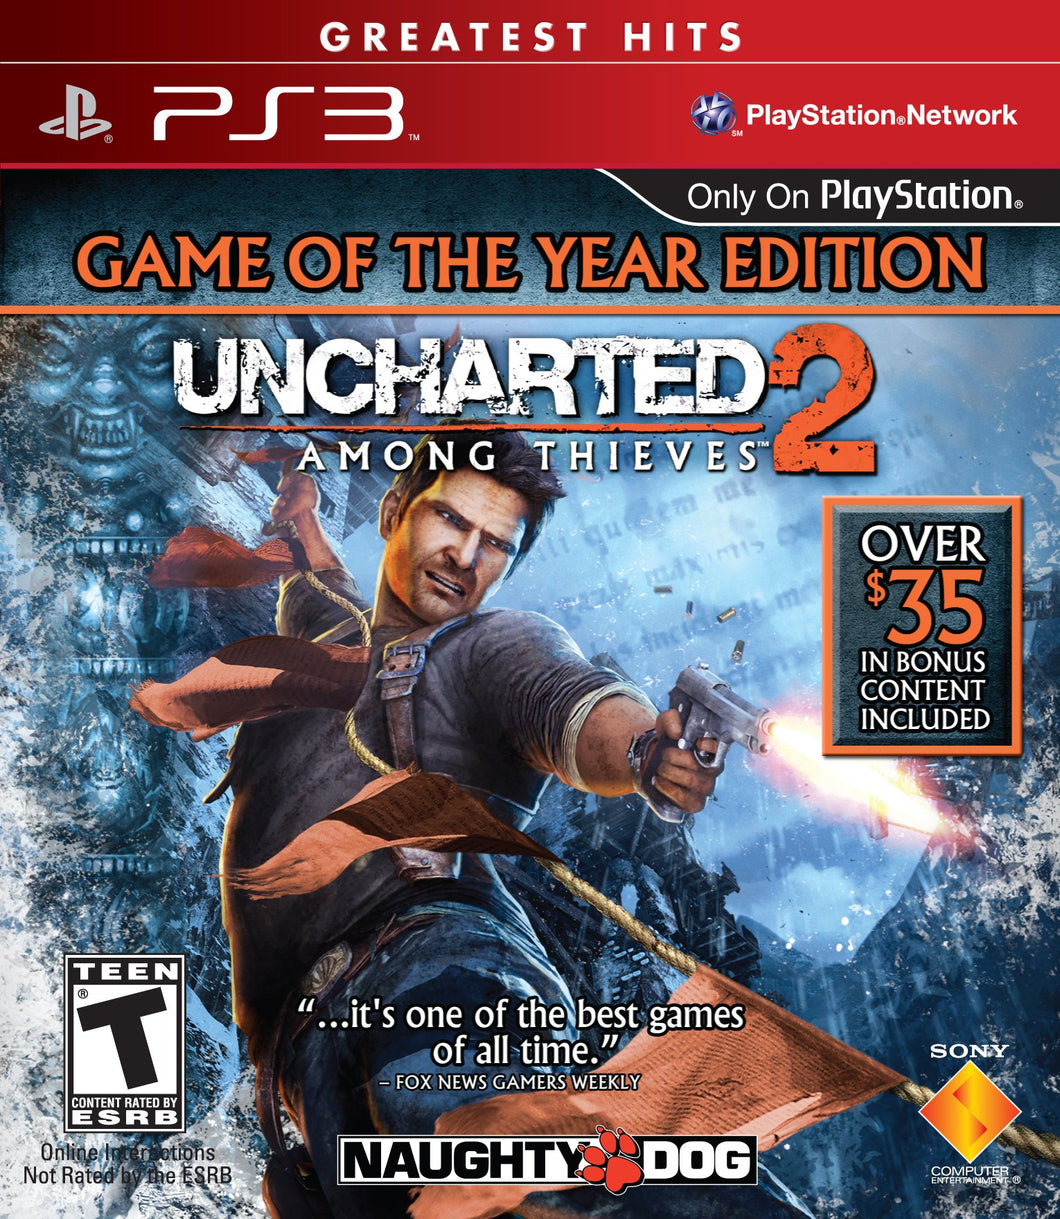 Uncharted 2: game of the year edition - Playstation 3